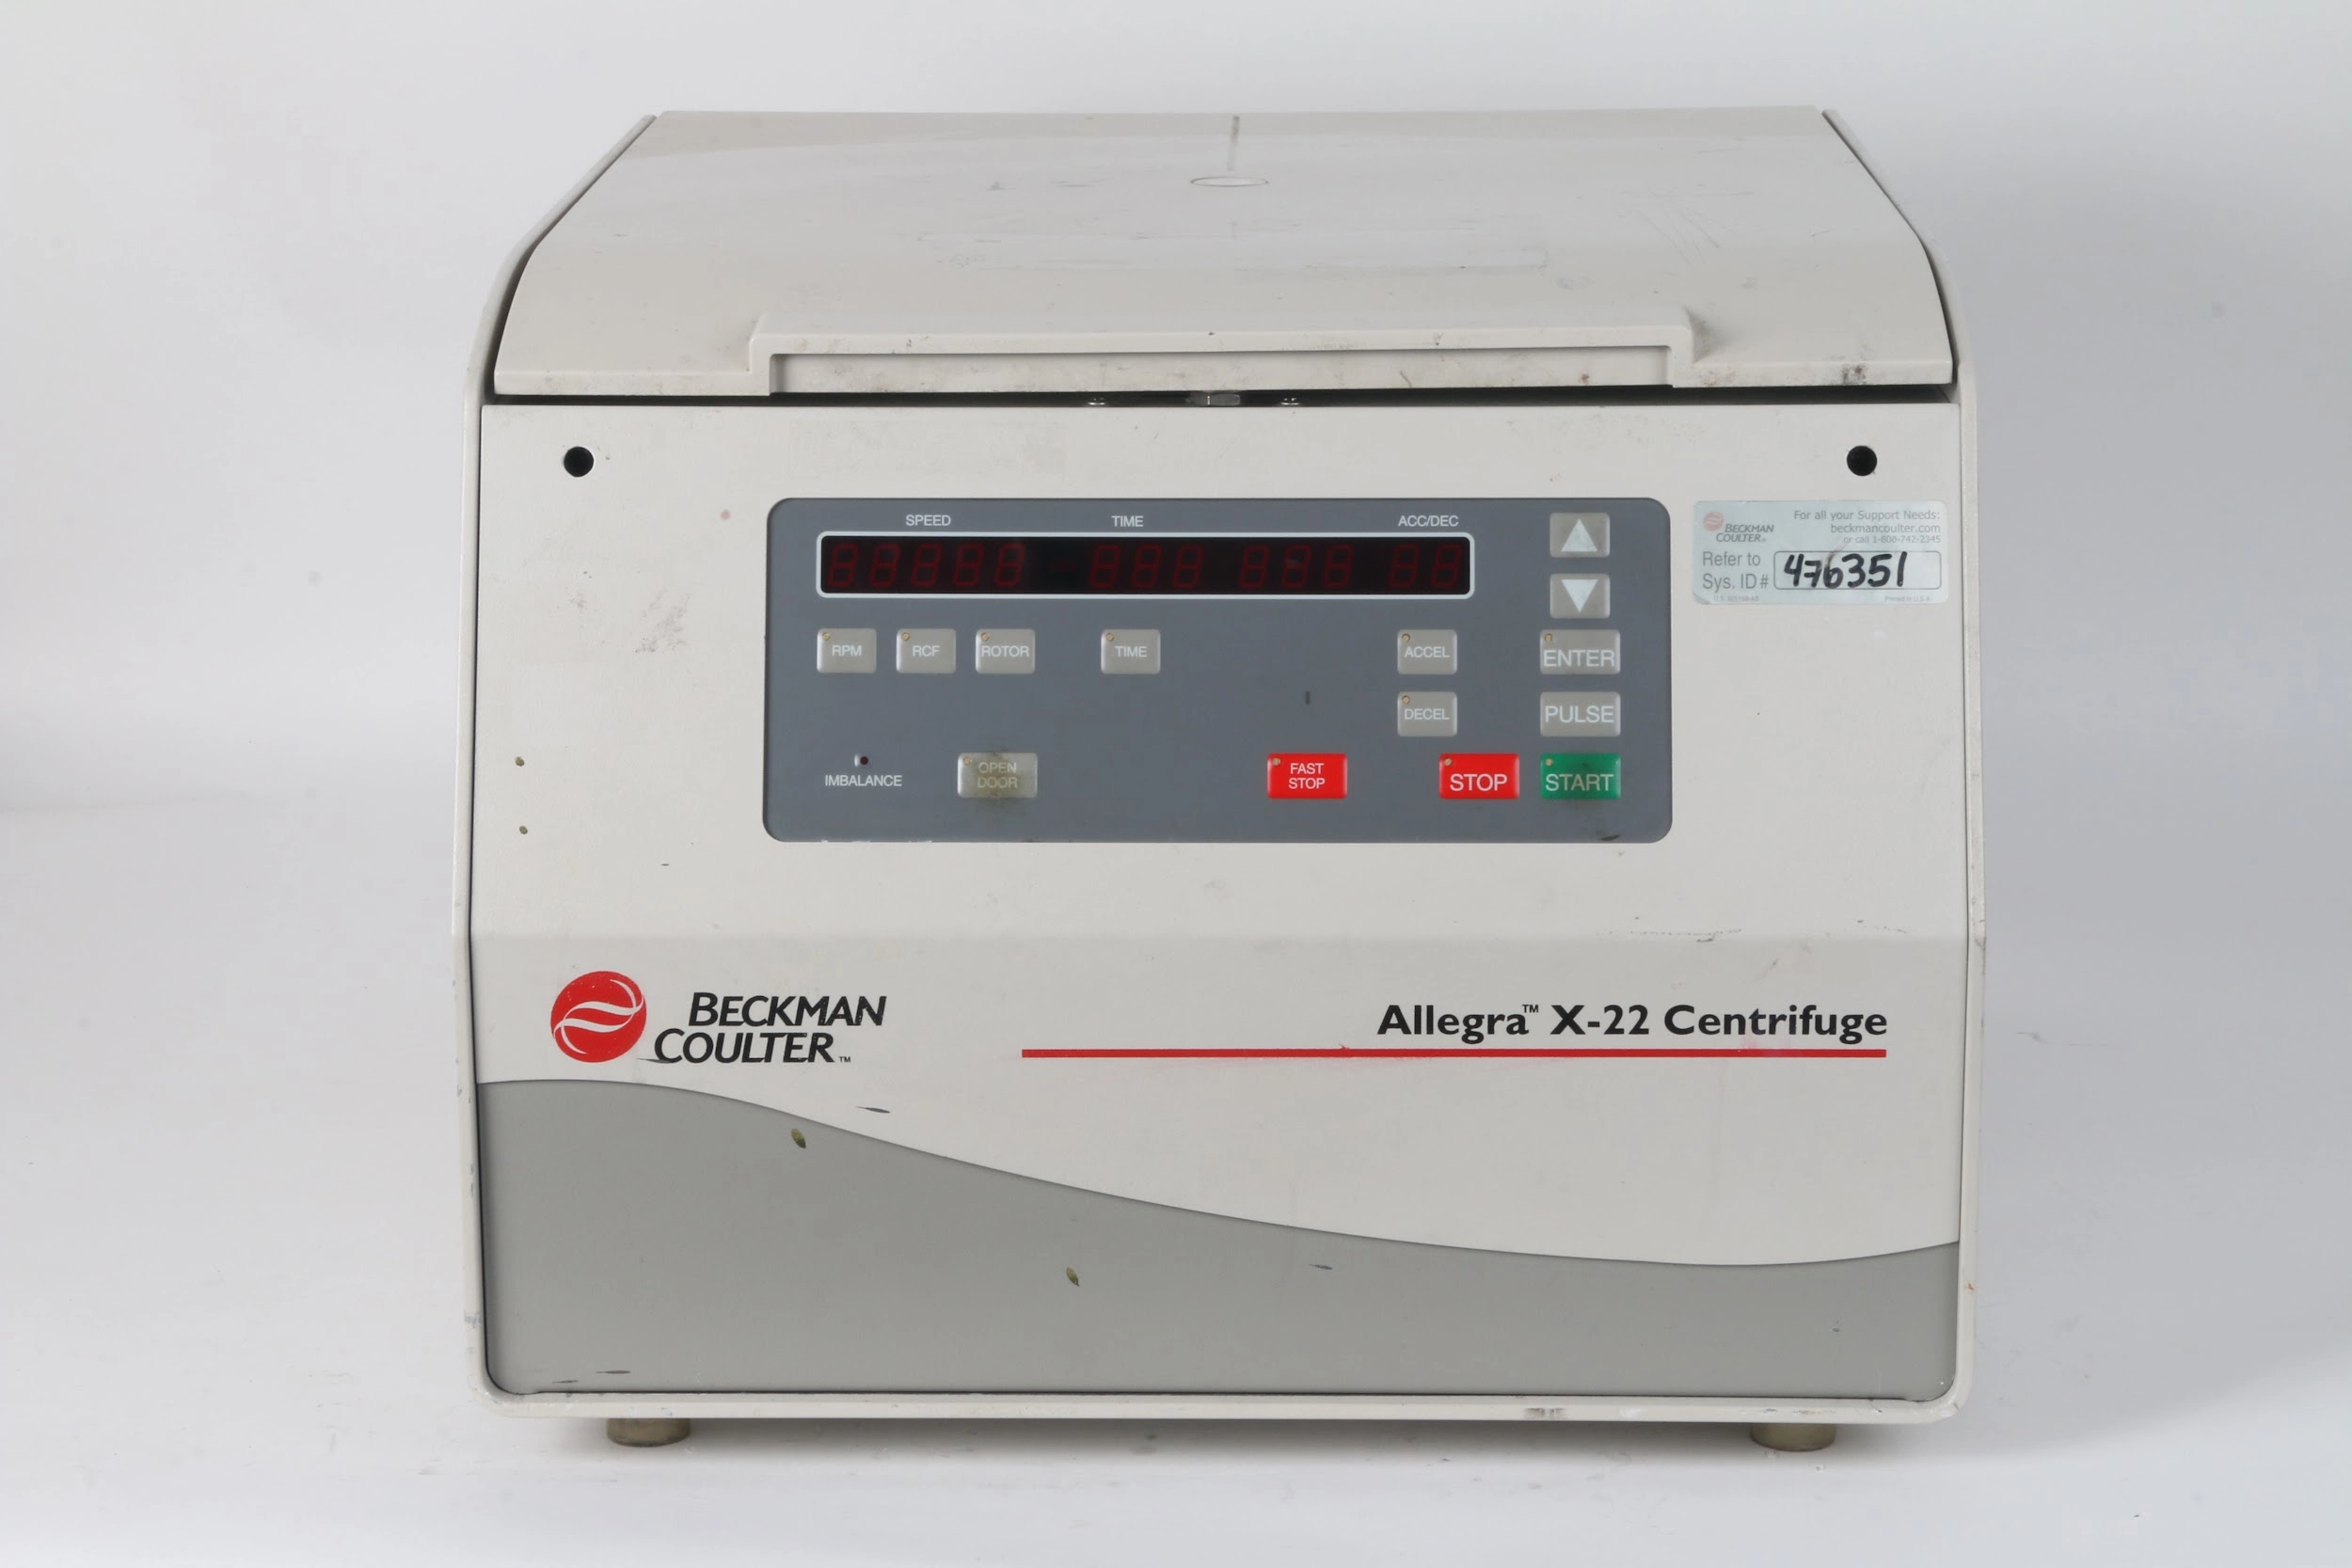 Beckman Coulter Allegra X-22 Centrifuge, 4200 RPM 392184 - AS IS